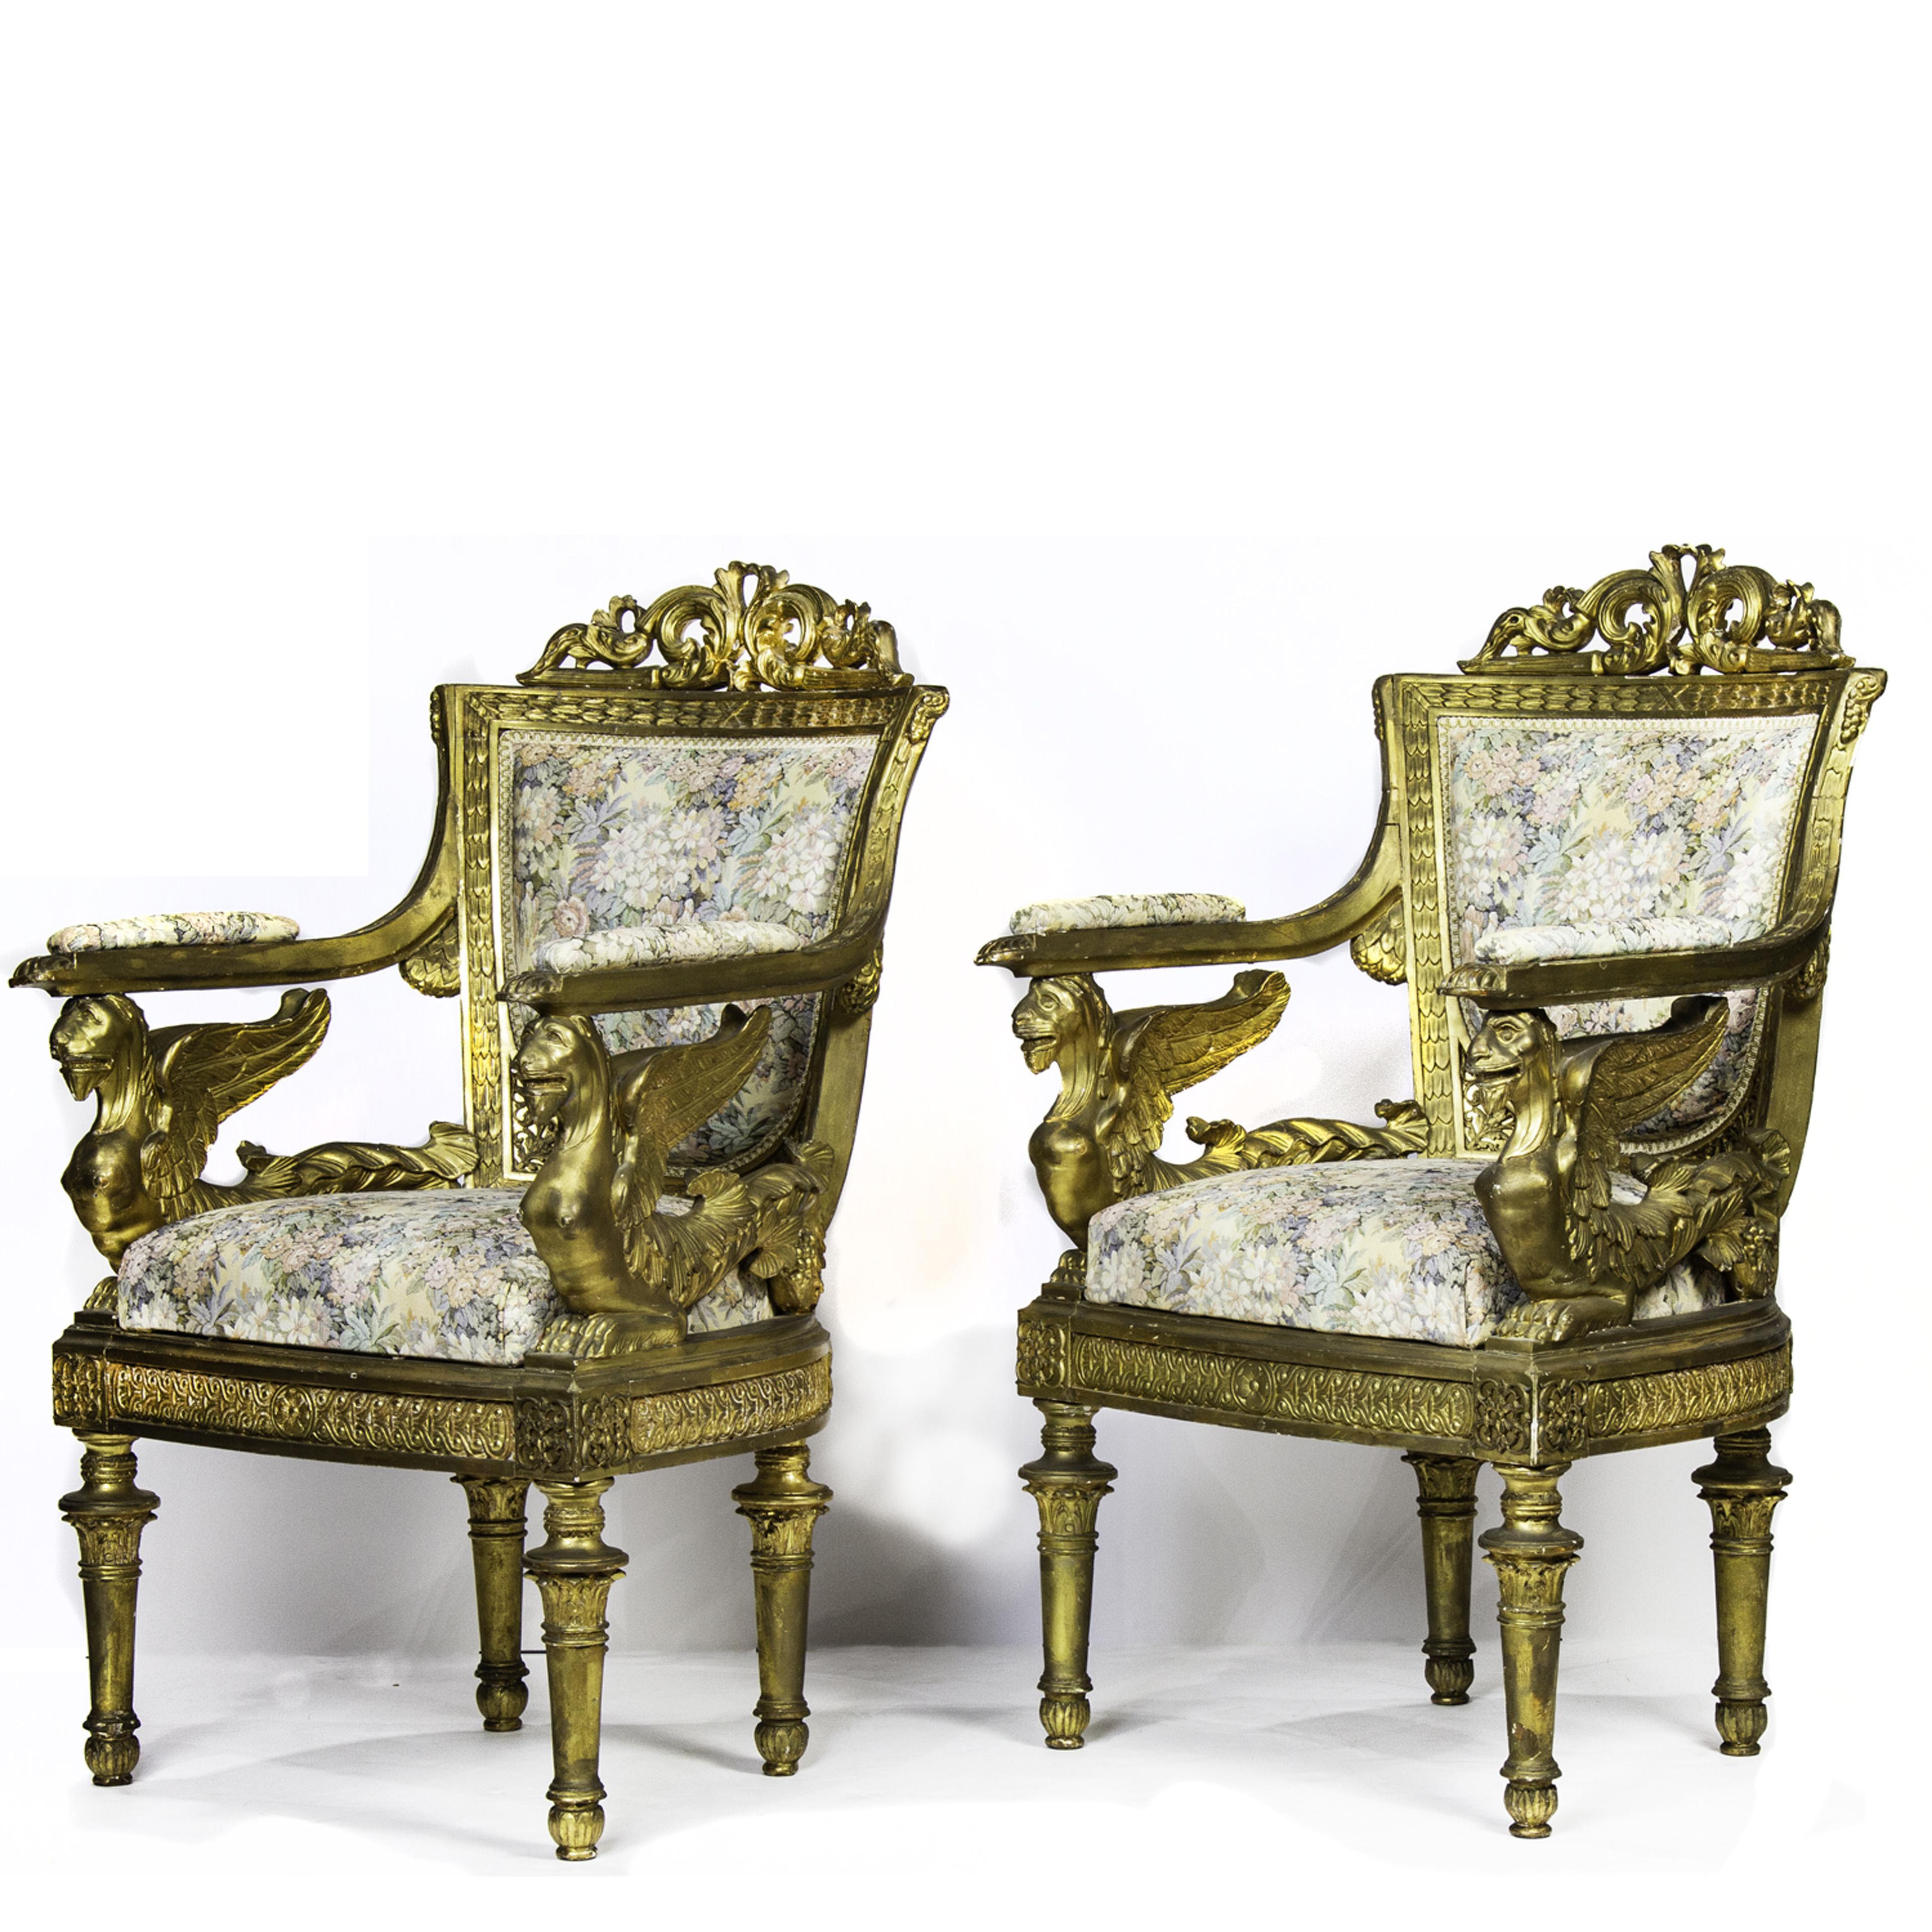  LOT OF 2 LOUIS XVI STYLE GILTWOOD 3a4d8f